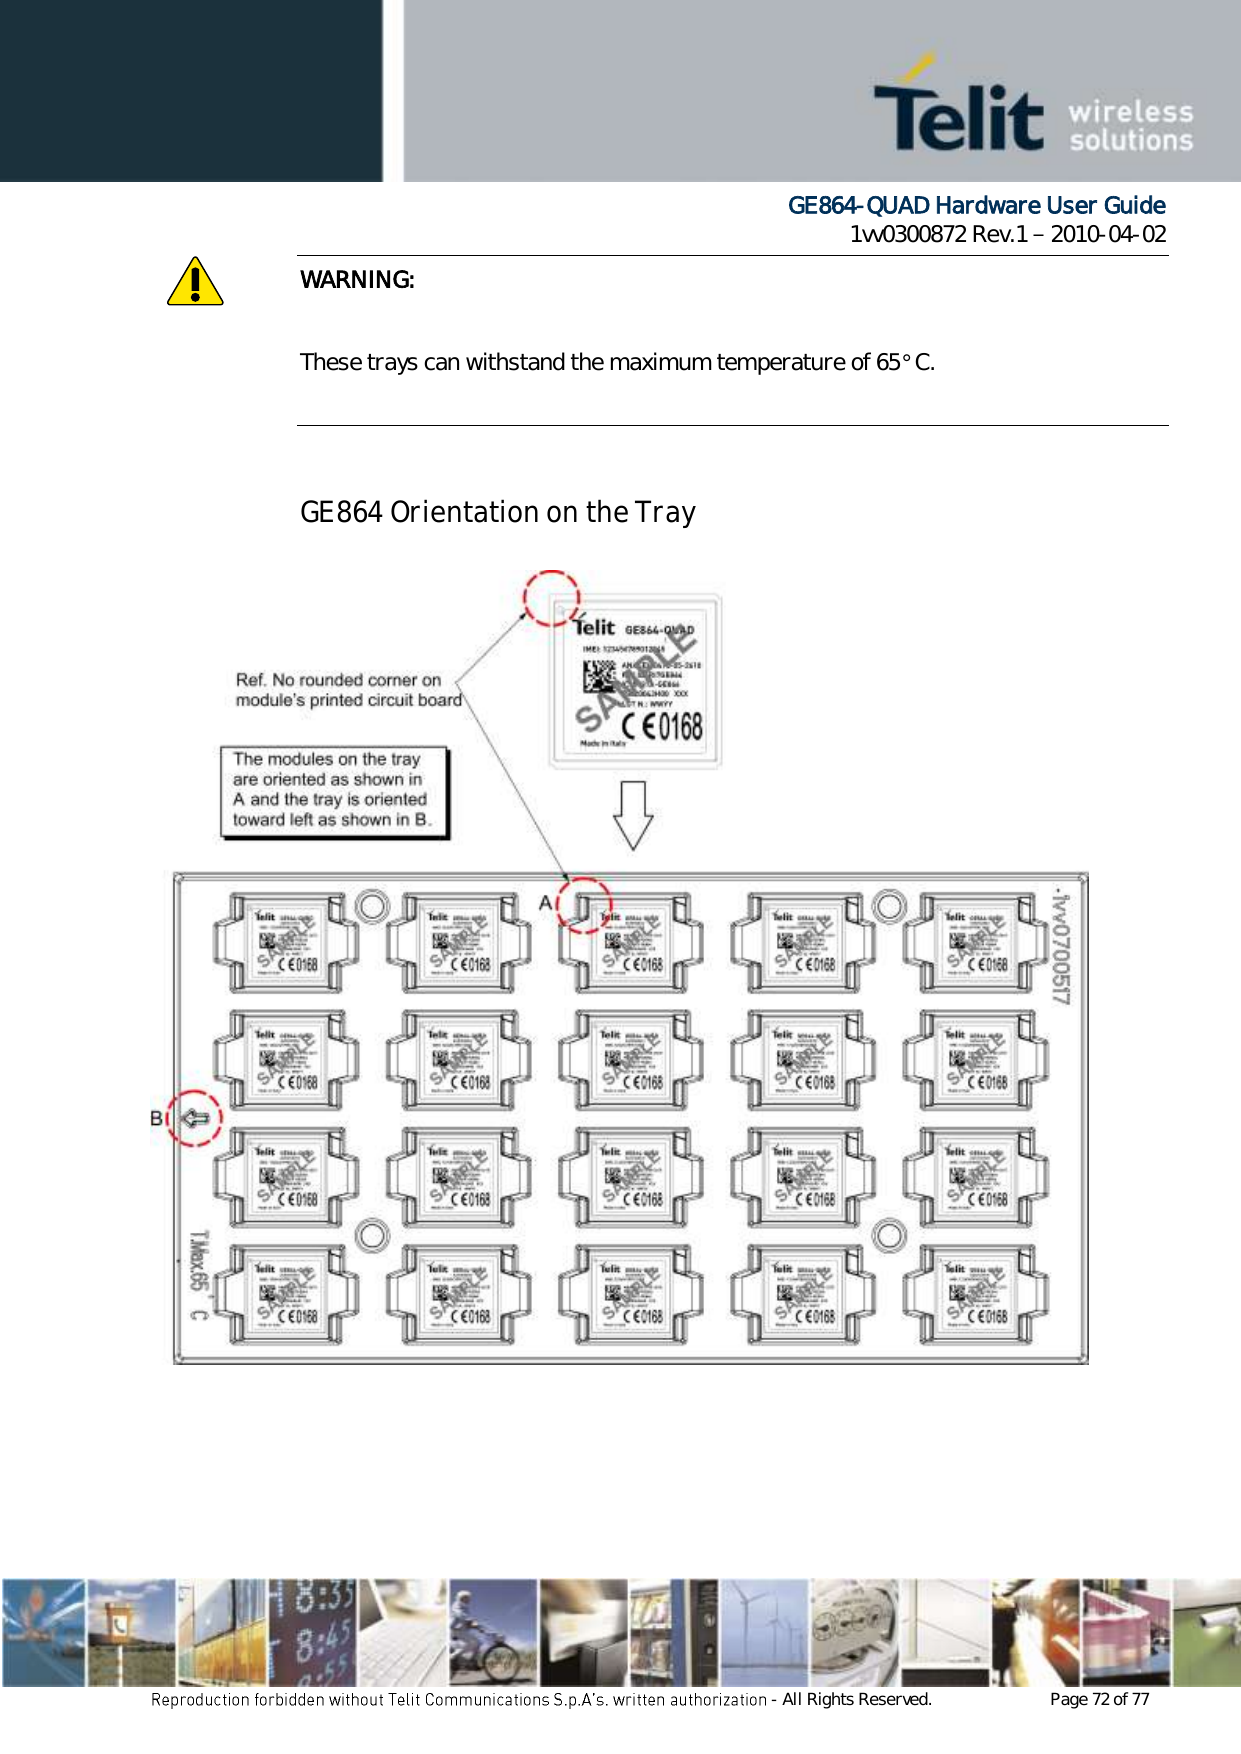      GE864-QUAD Hardware User Guide 1vv0300872 Rev.1   2010-04-02 - All Rights Reserved.    Page 72 of 77  WARNING:  These trays can withstand the maximum temperature of 65° C.   GE864 Orientation on the Tray         